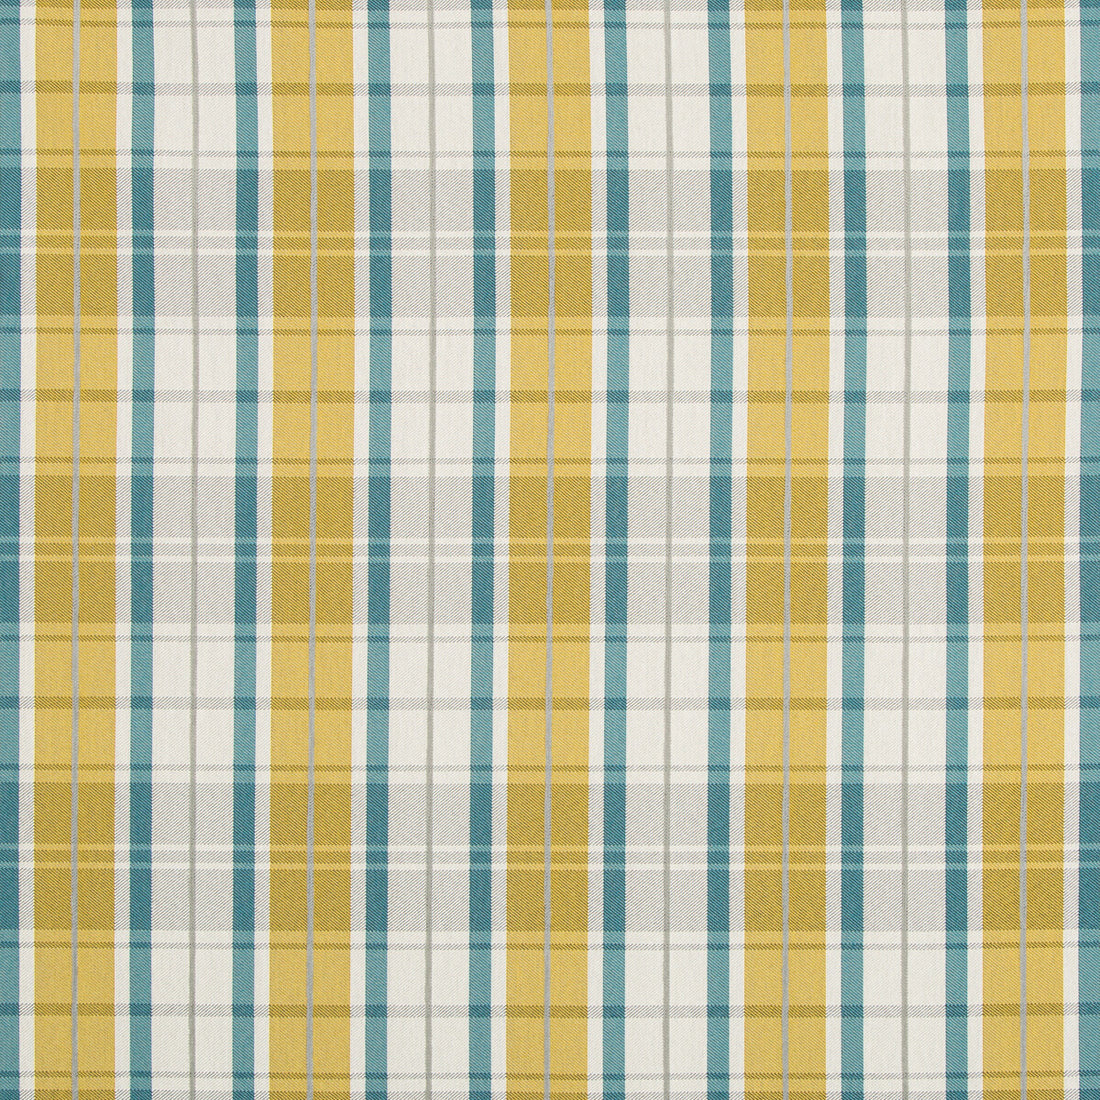 Ardsley fabric in lagoon color - pattern 35888.413.0 - by Kravet Contract in the Gis Crypton collection